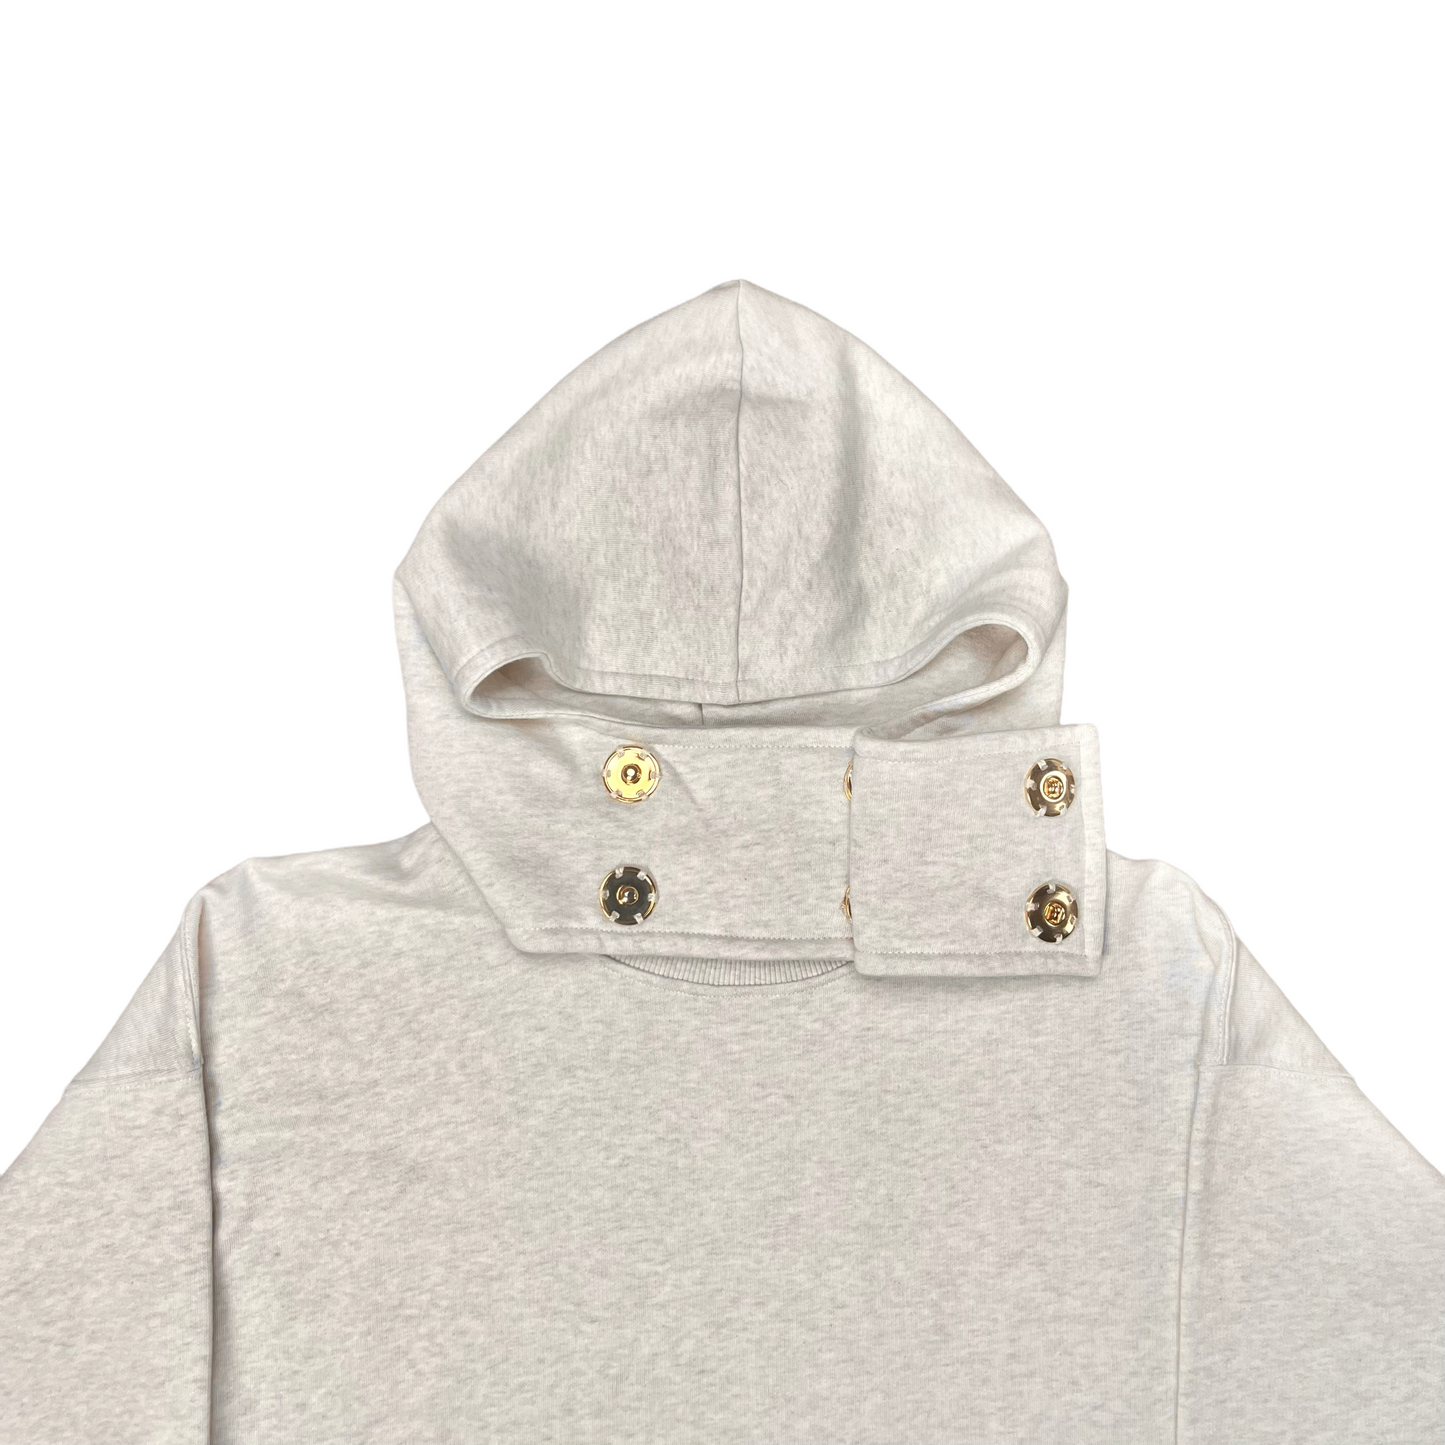 JW Anderson Button Up Popover Hoodie - AW19